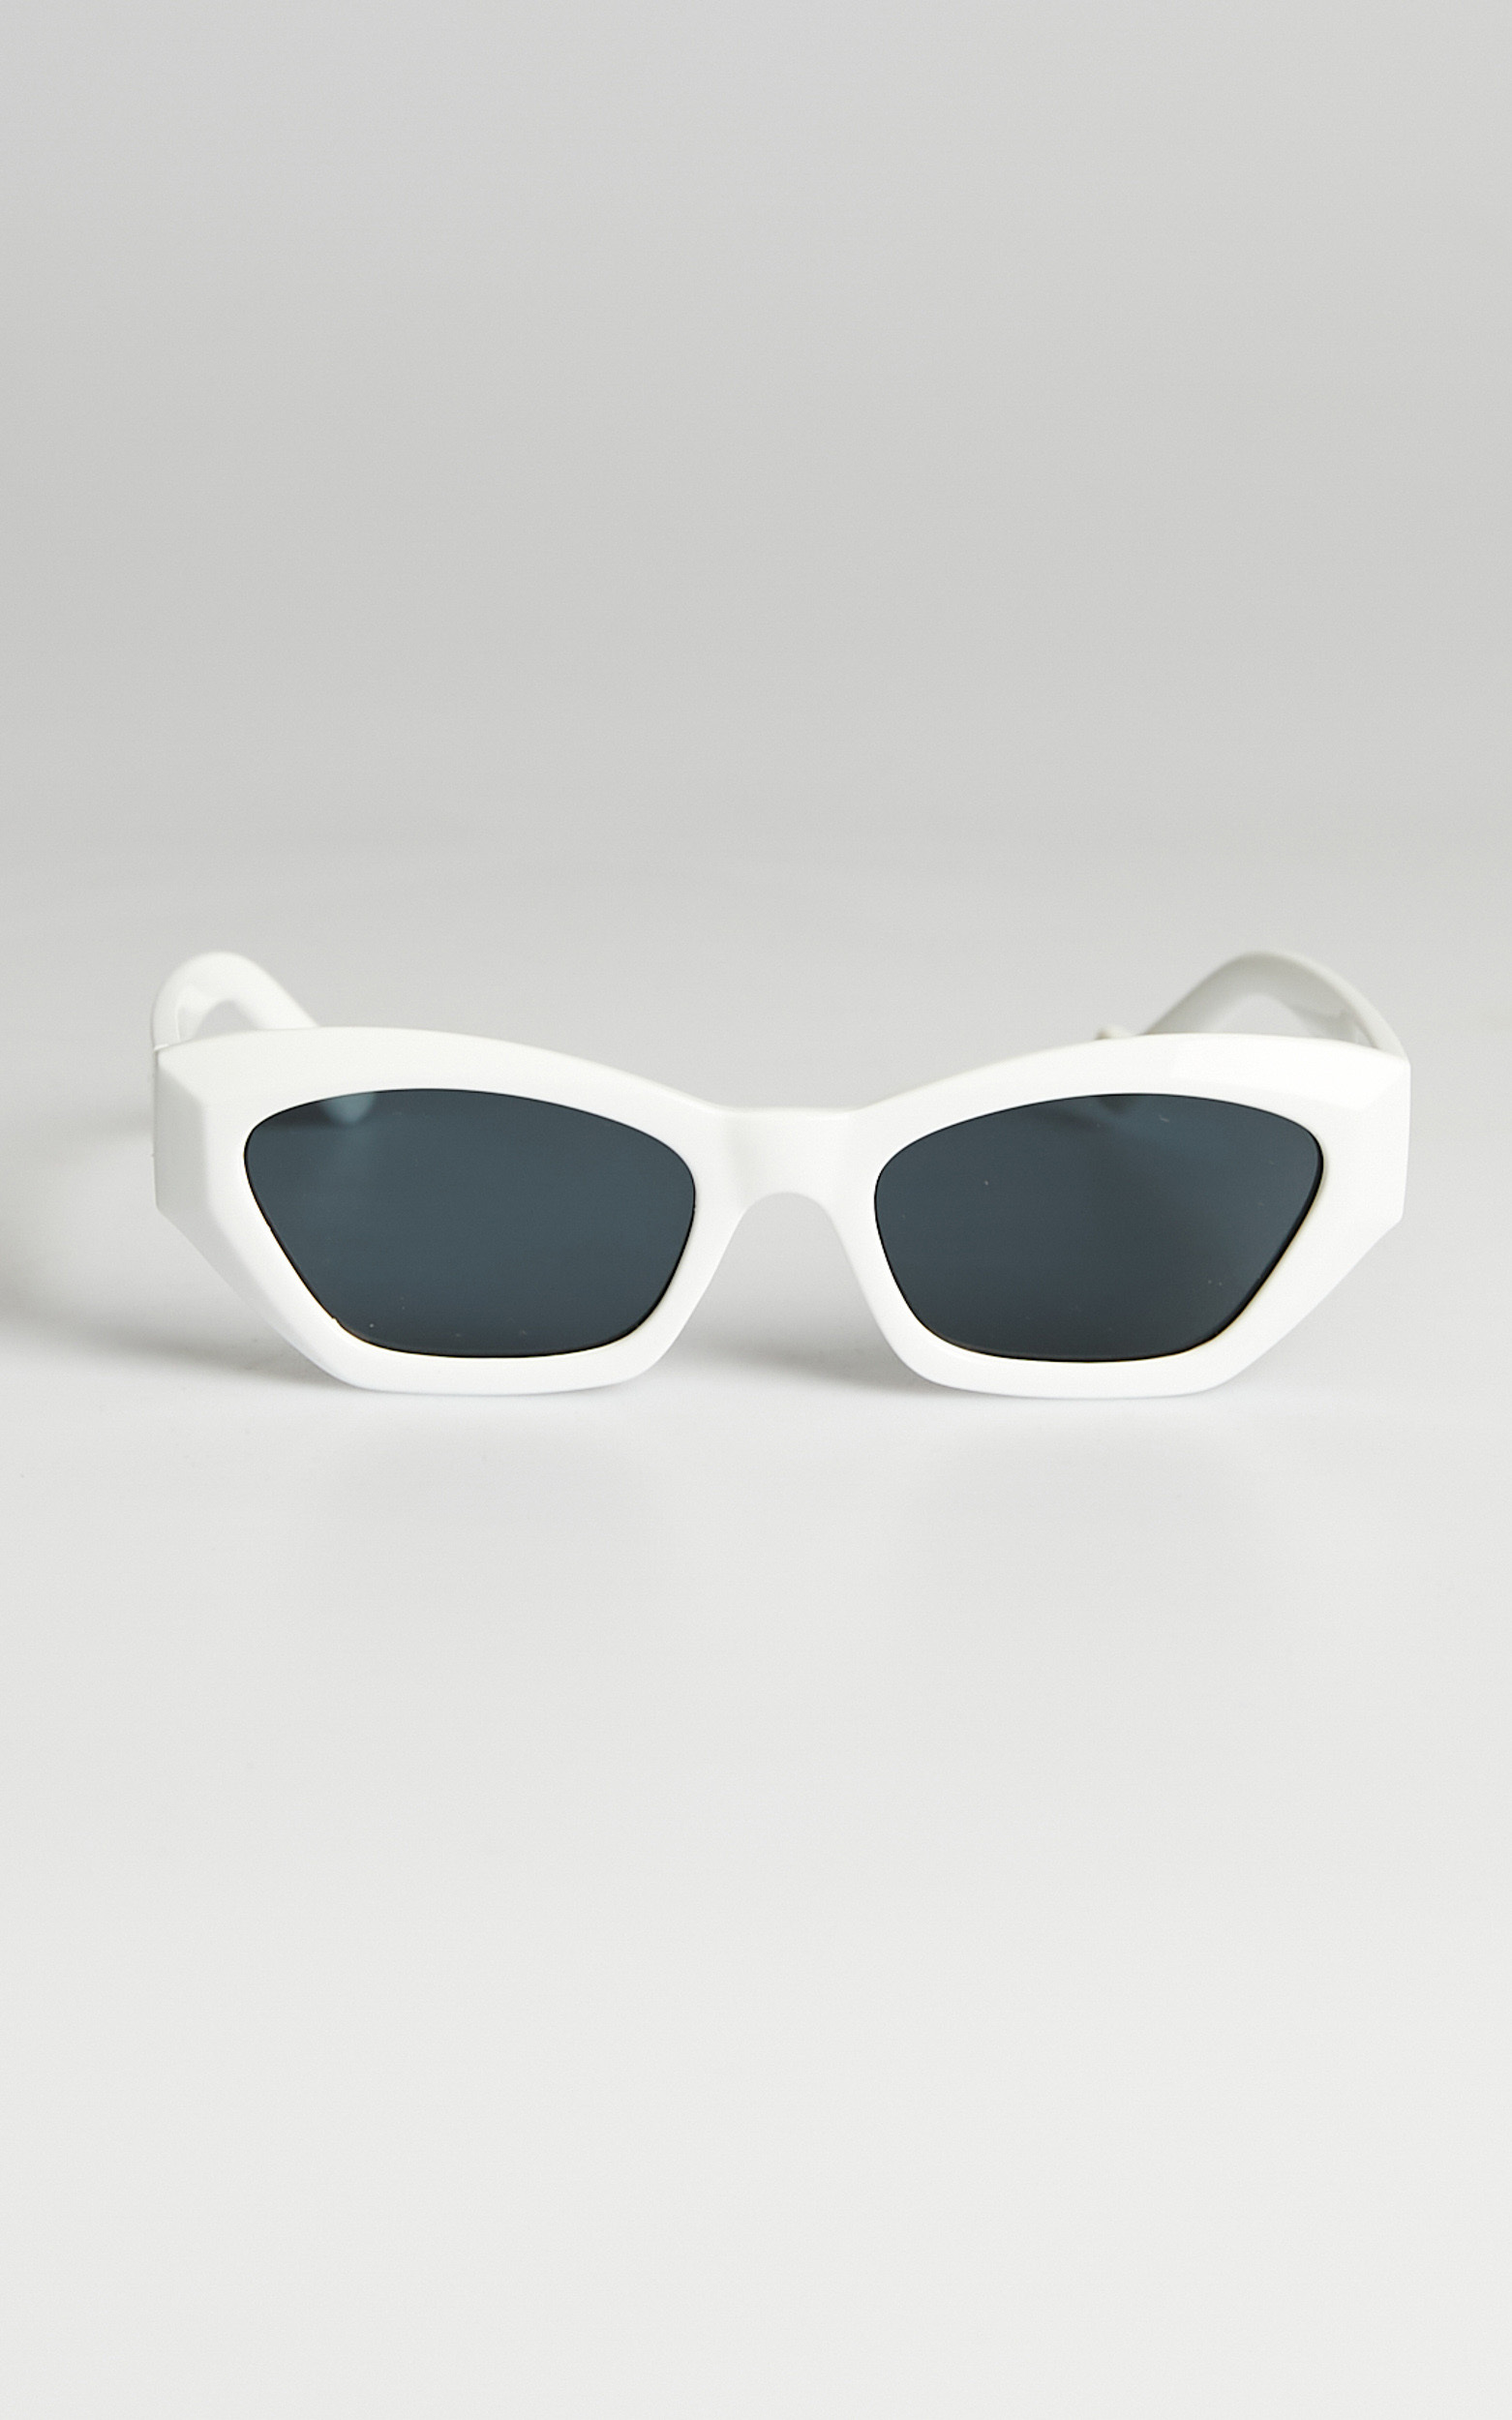 Melora Sunglasses in White - NoSize, WHT1, hi-res image number null